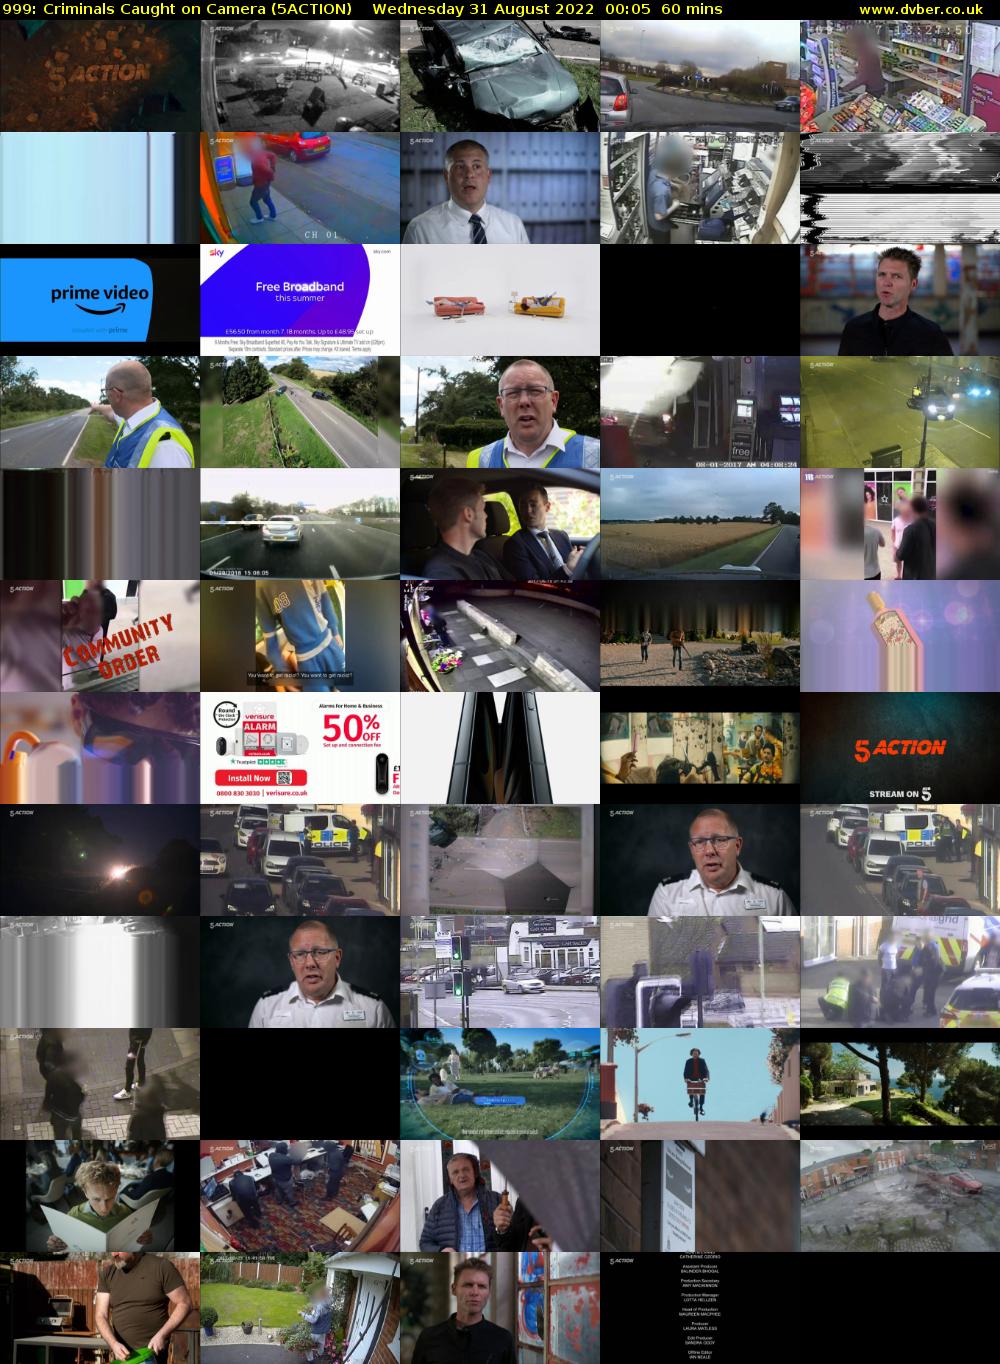 999: Criminals Caught on Camera (5ACTION) Wednesday 31 August 2022 00:05 - 01:05